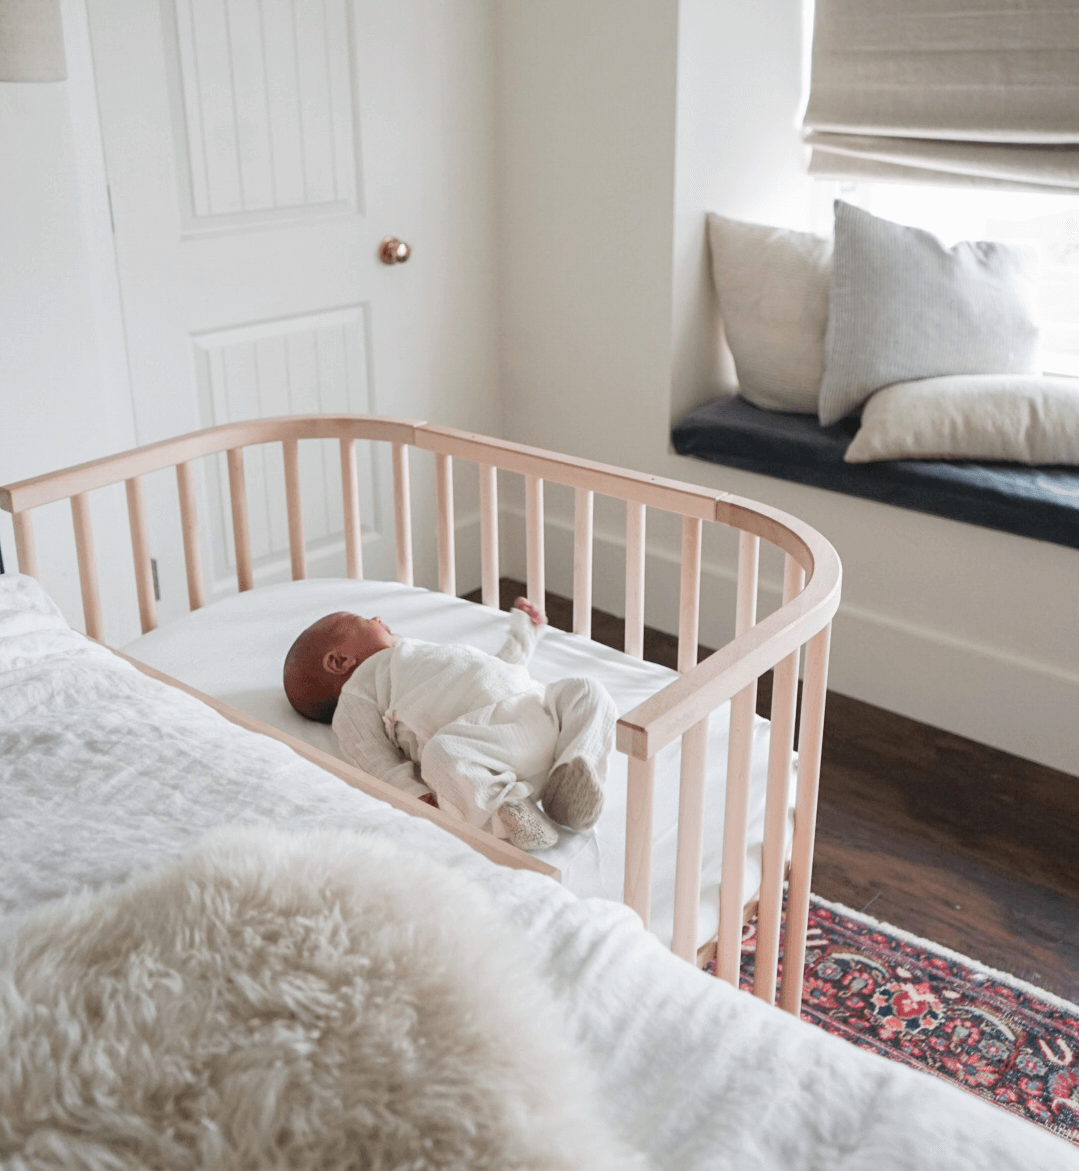 How to Co Sleep with Infant and Wake Up Well-Rested